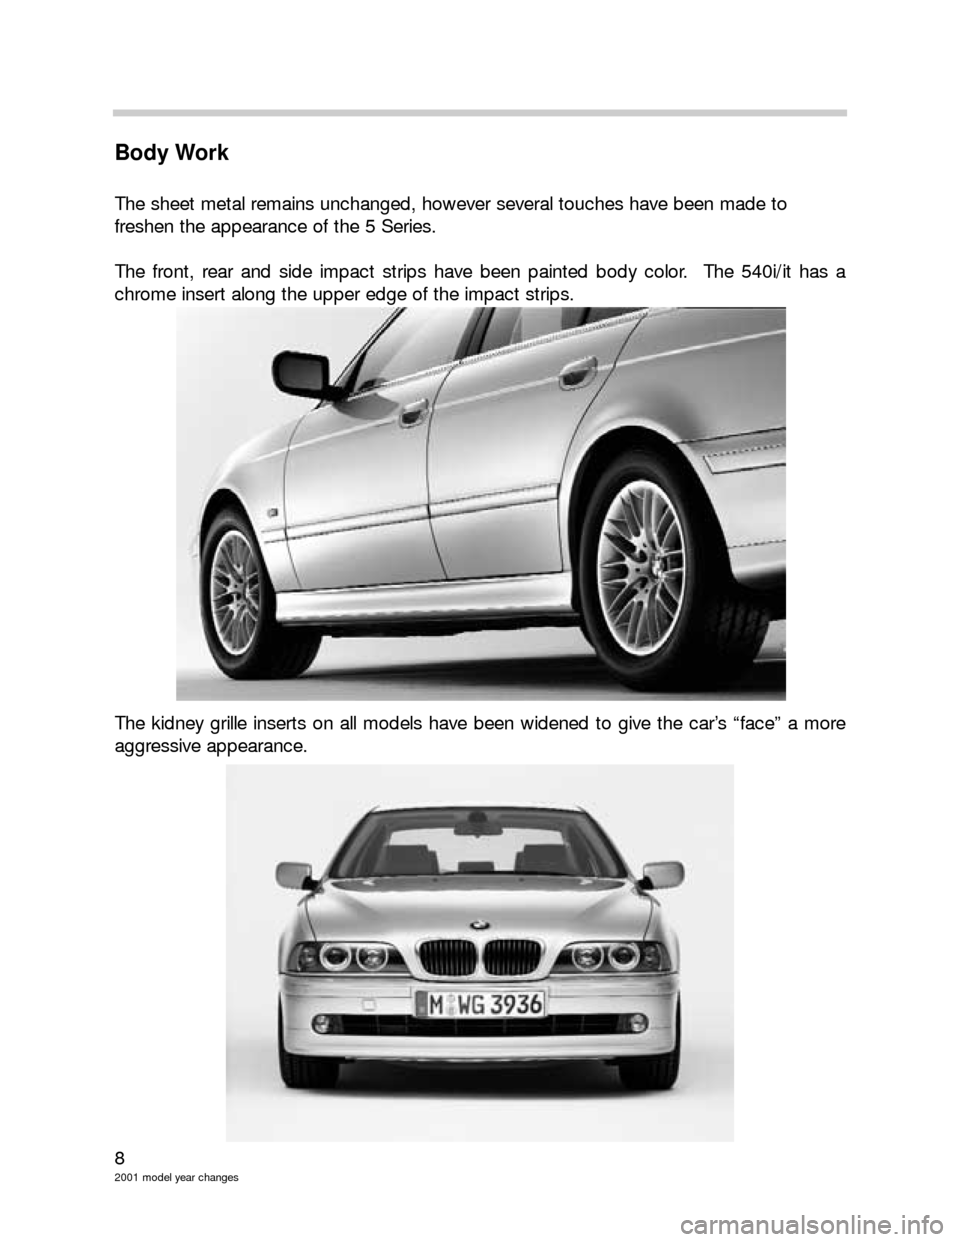 BMW 3 SERIES 2003 E46 Model Yar Changes 8
2001 model year changes
Body Work
The sheet metal remains unchanged, however several touches have been made to 
freshen the appearance of the 5 Series.
The front, rear and side impact strips have be